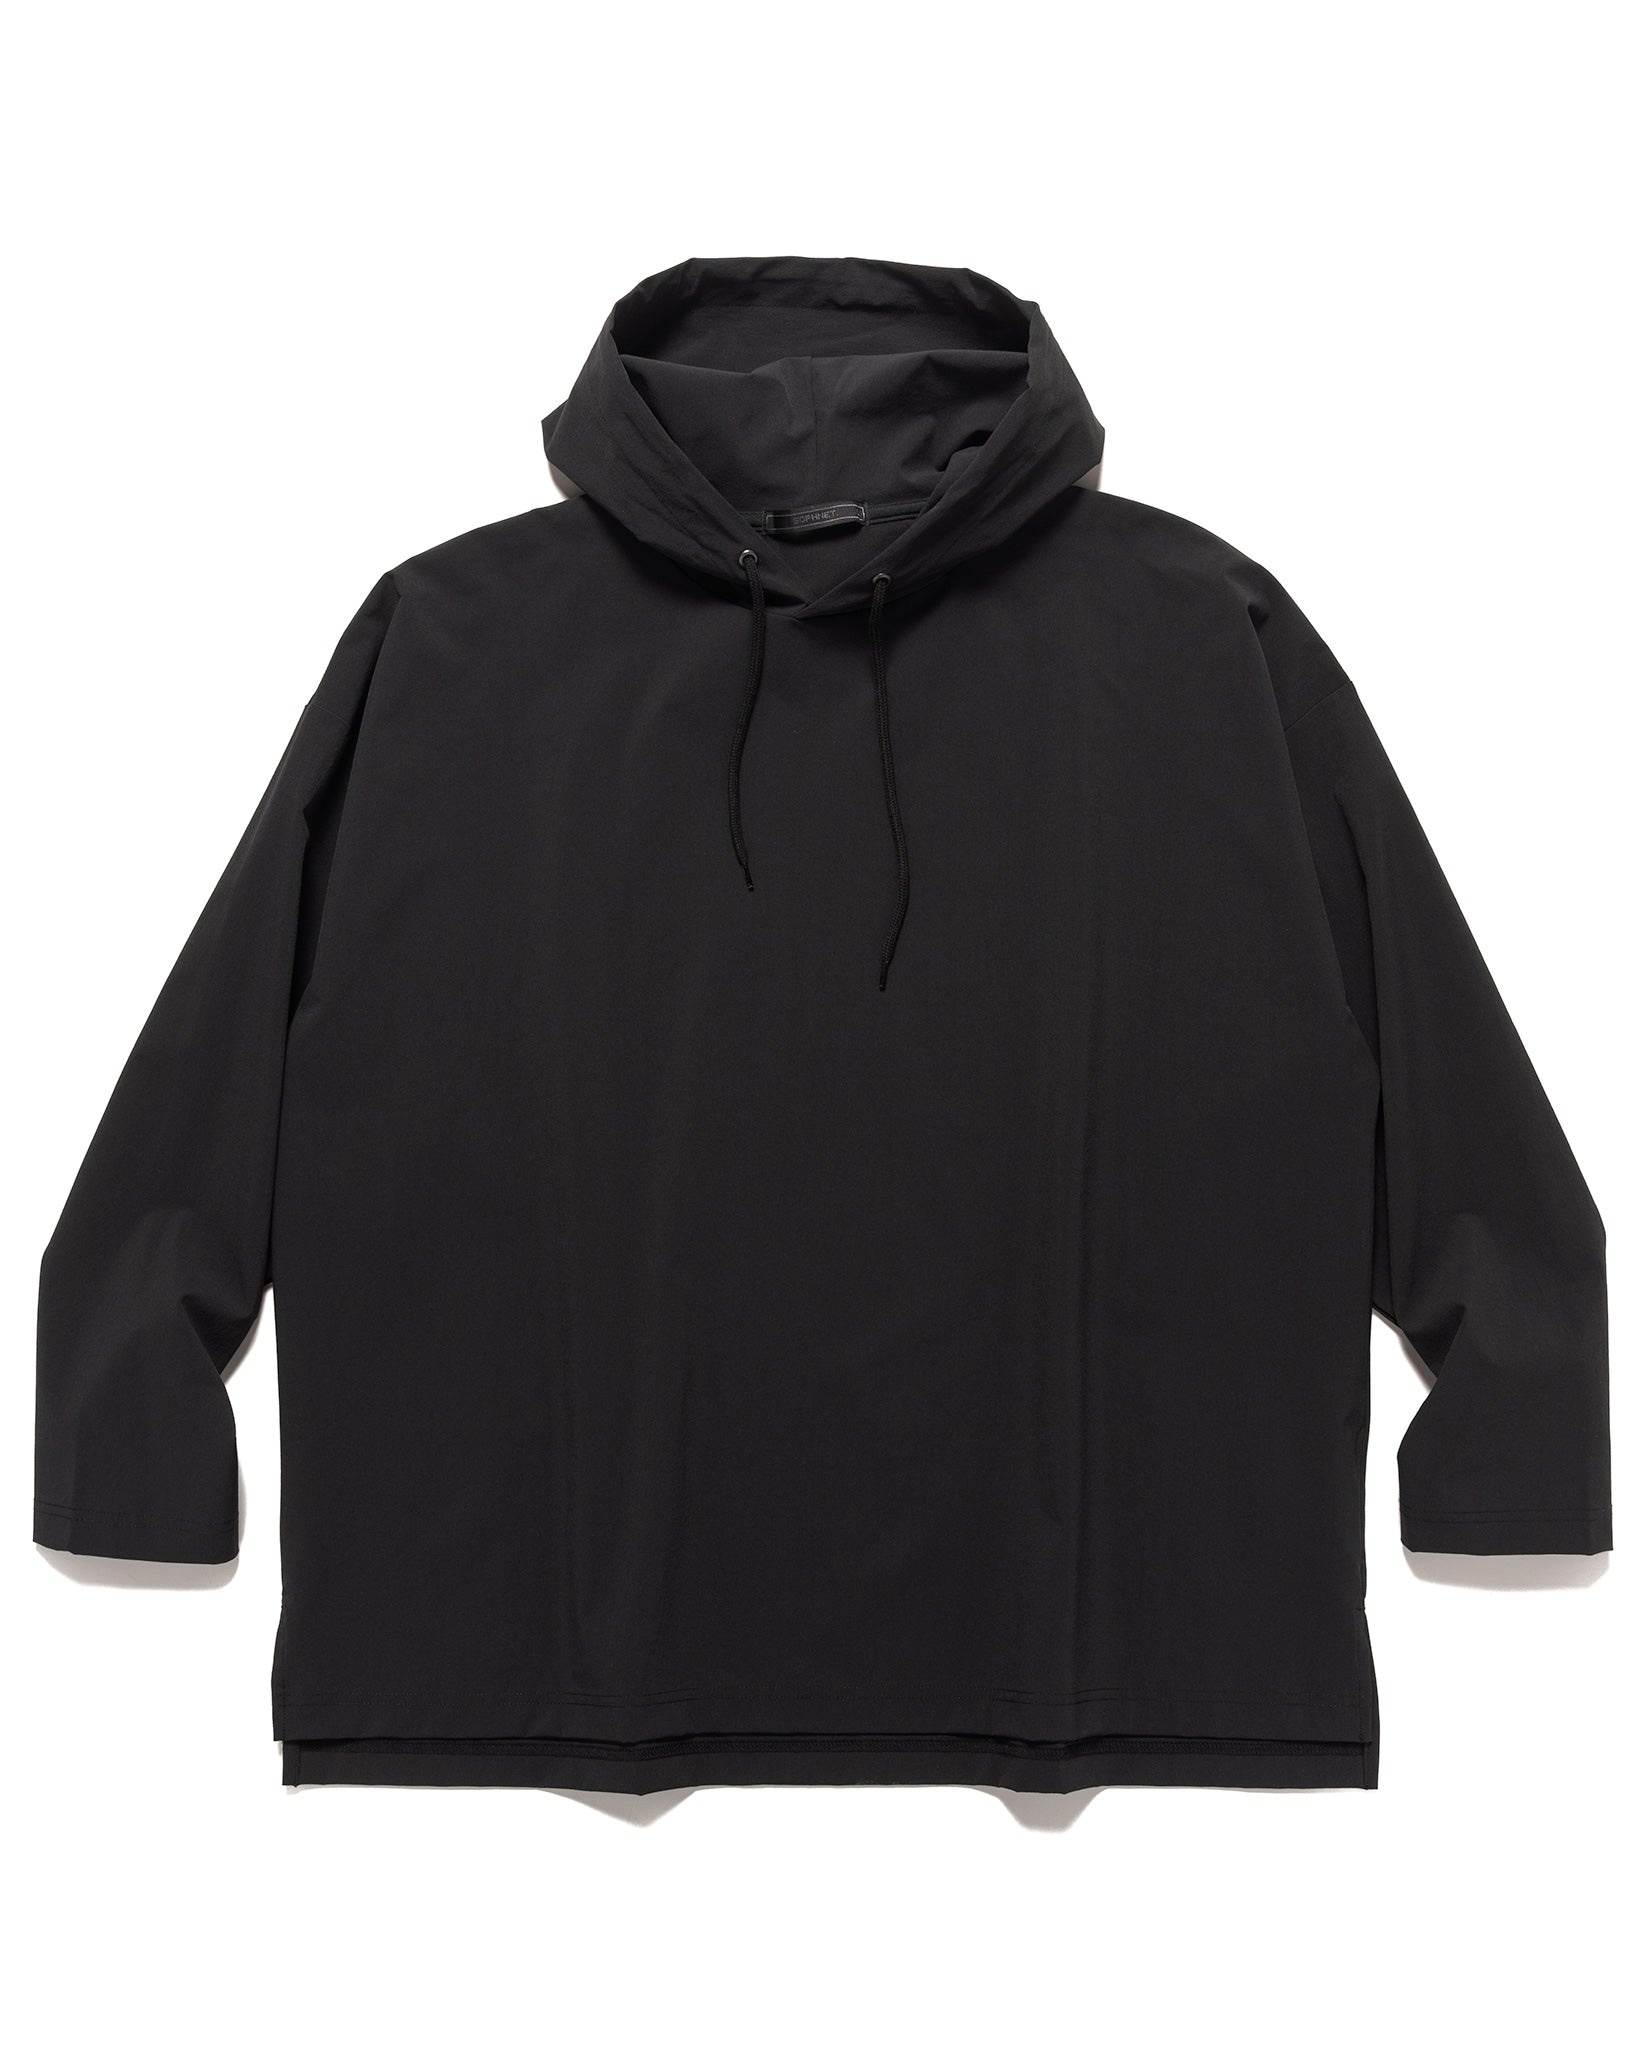 4Way Stretch Oversized Pullover Hoodie Black - 1